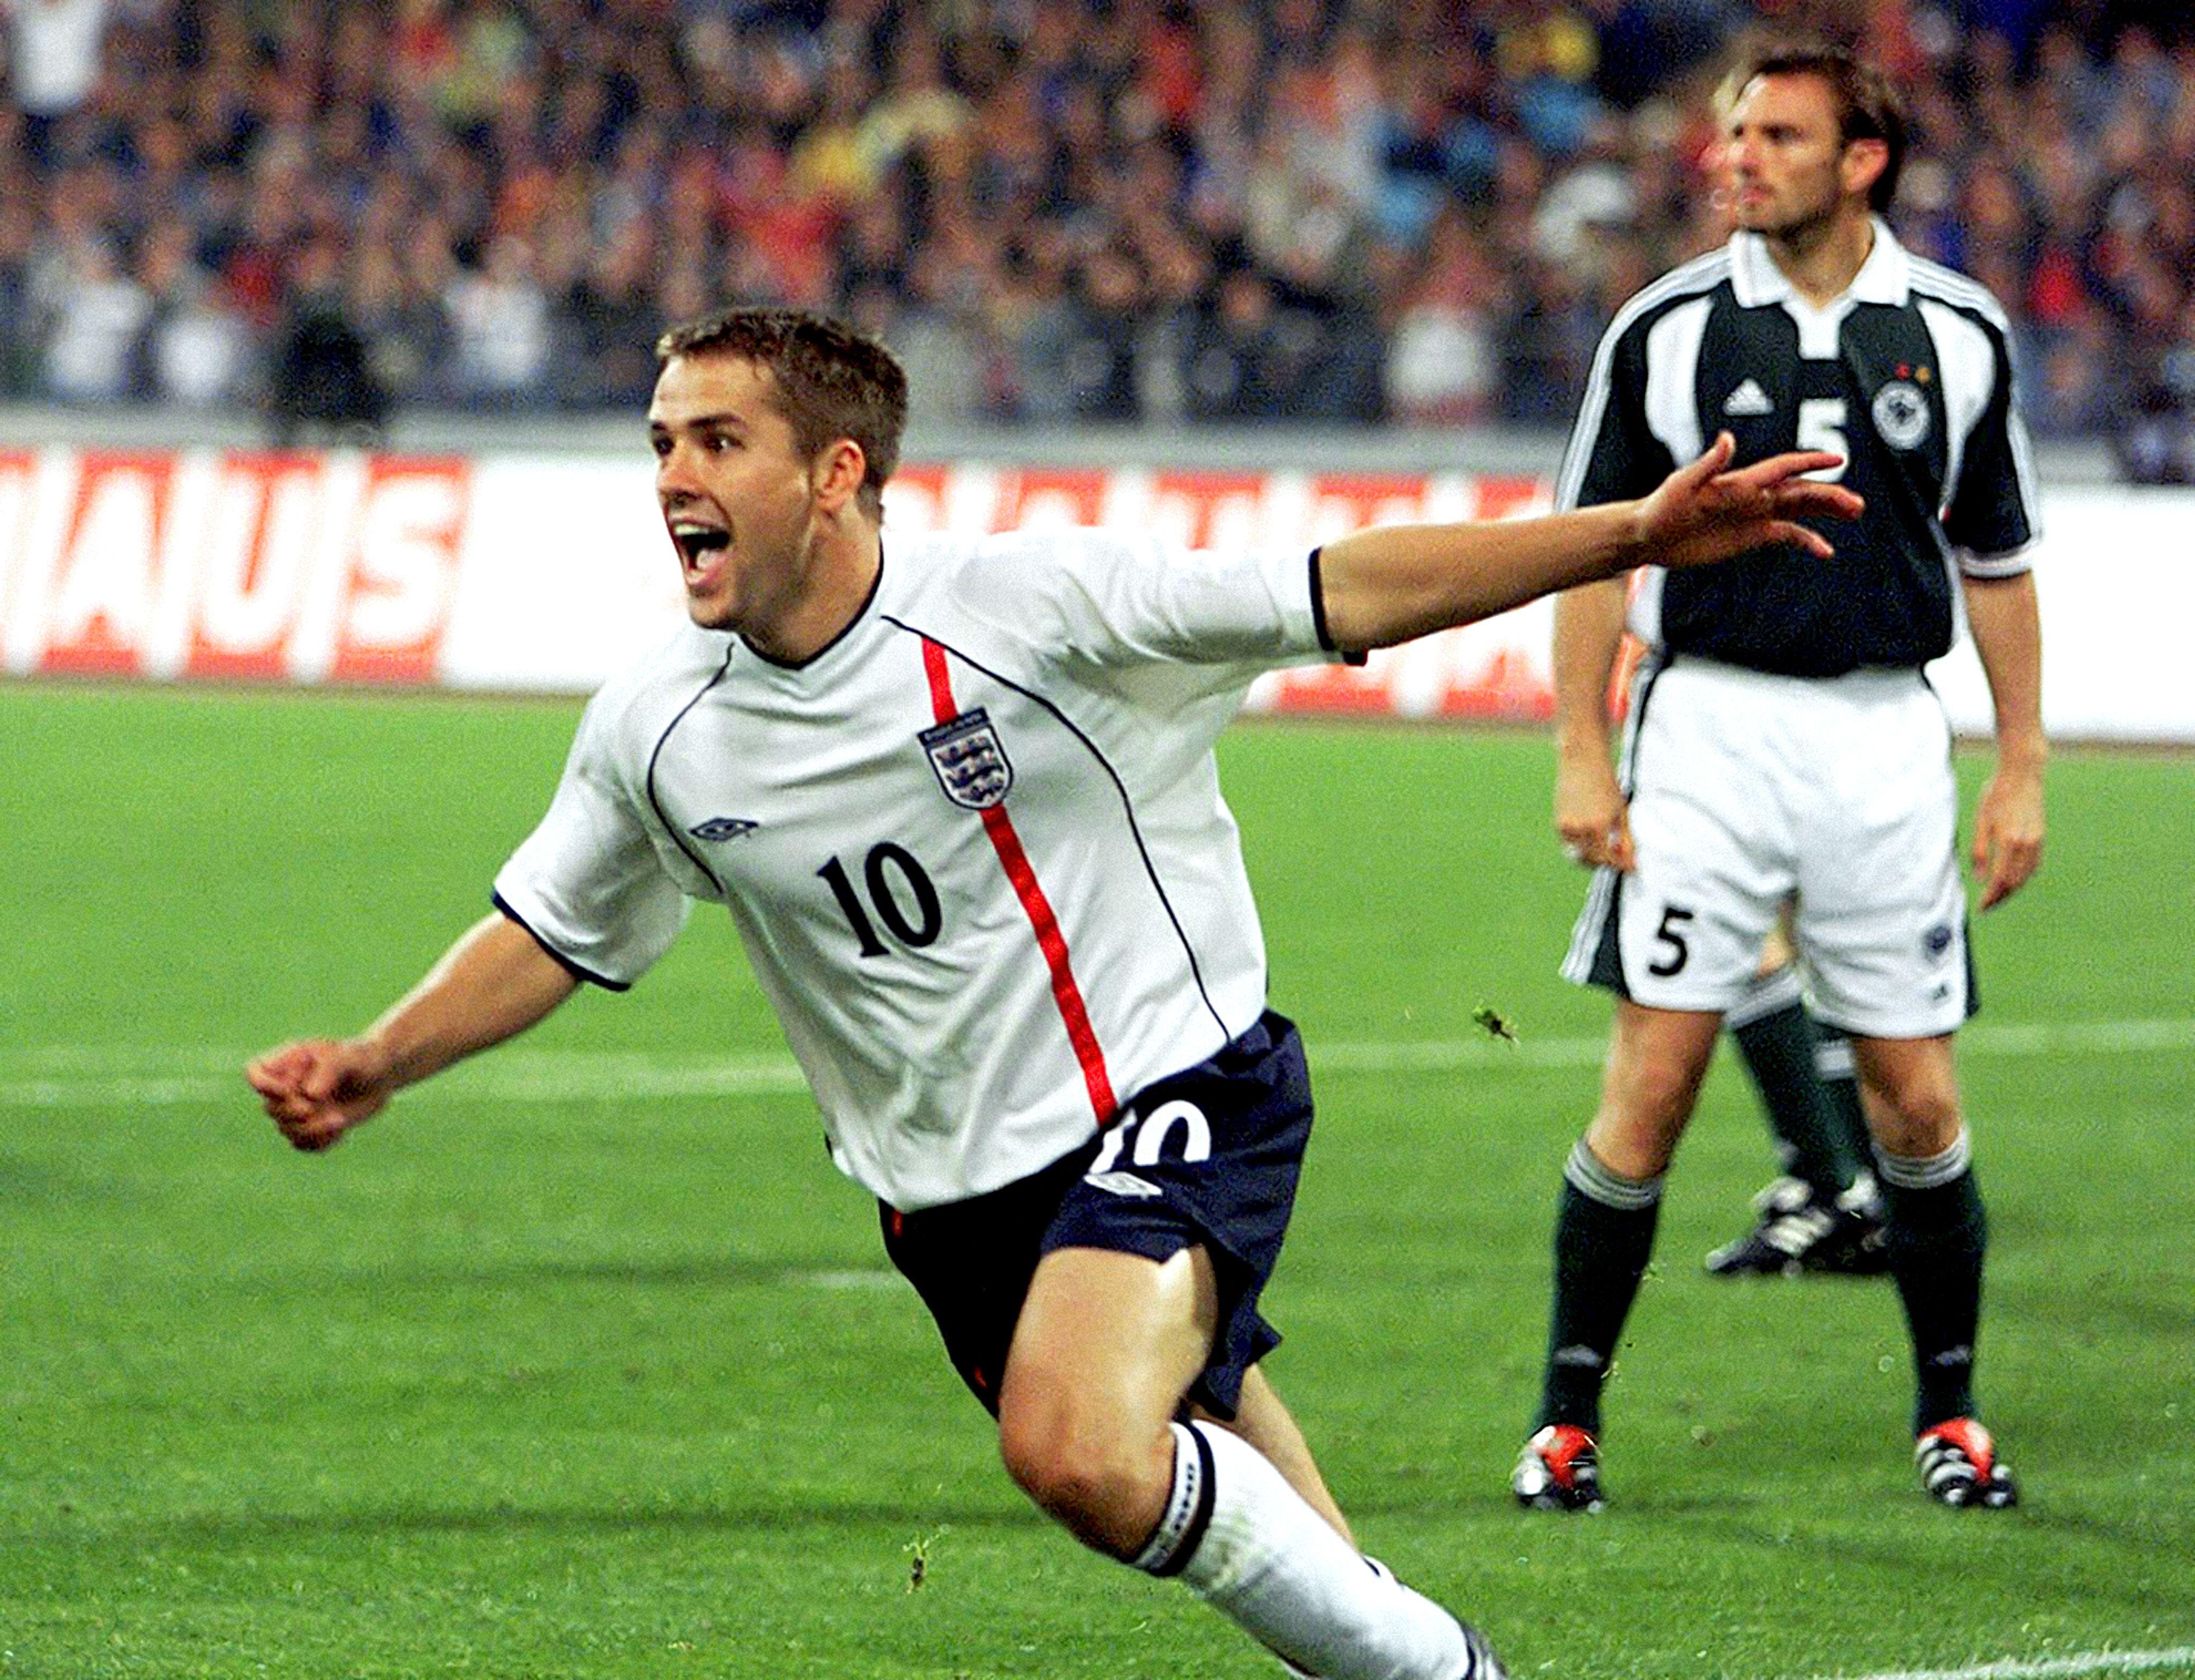 Michael Owen celebrates his second goal in England's 5-1 victory over Germany in Munich, September 2001.